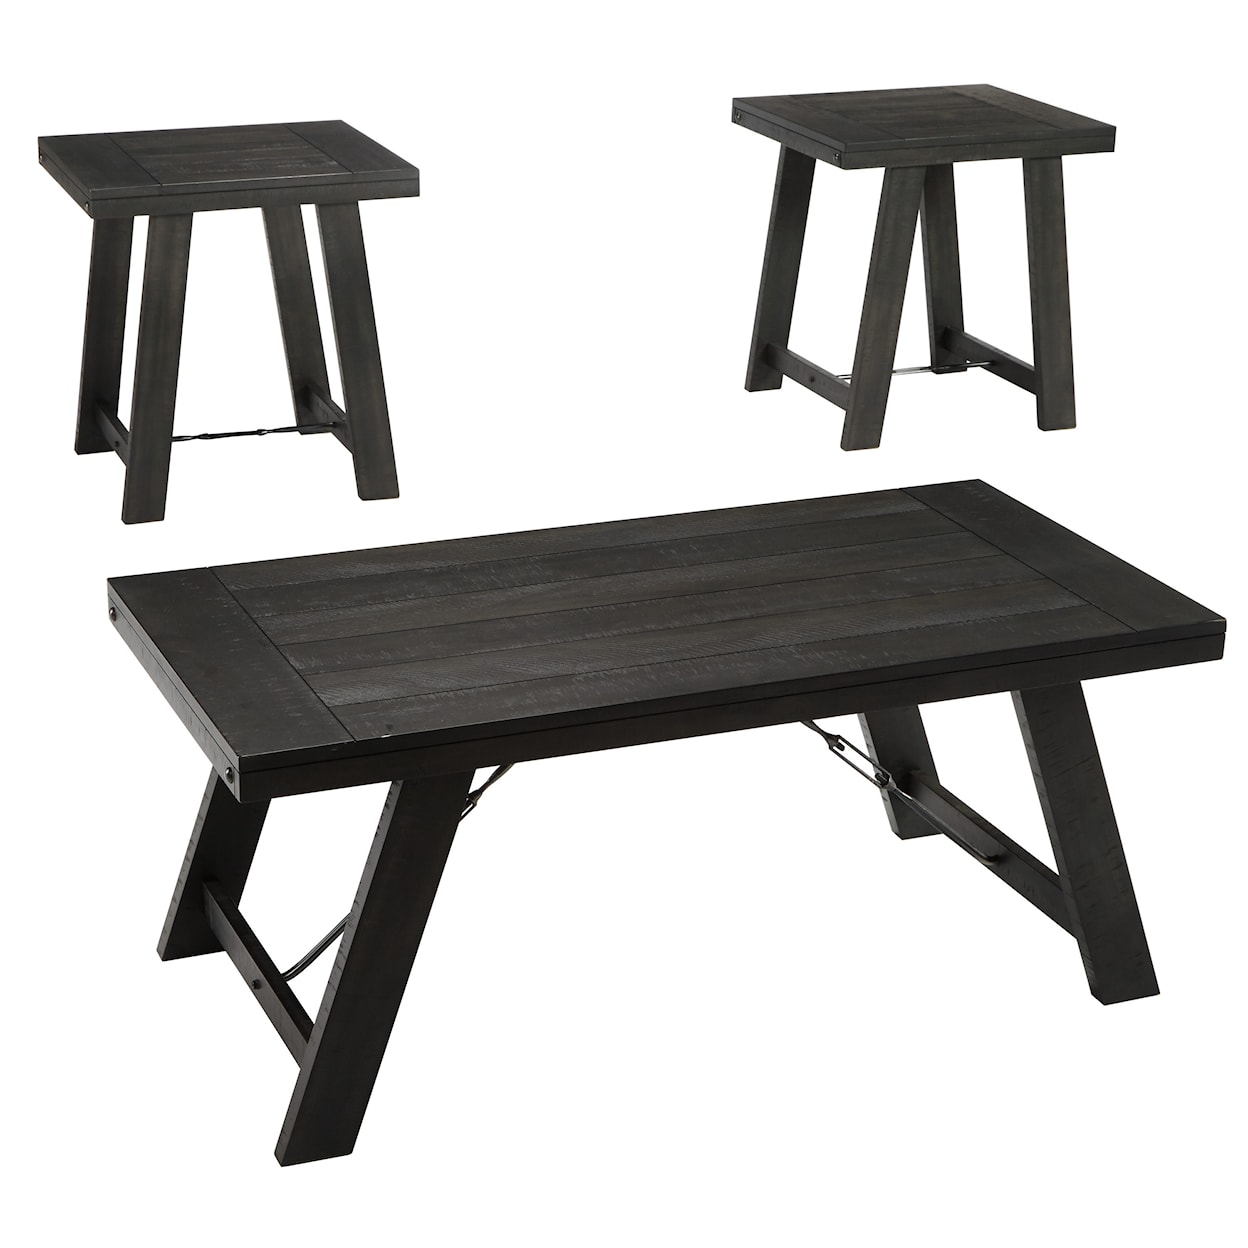 Michael Alan Select Noorbrook Occasional Table Group